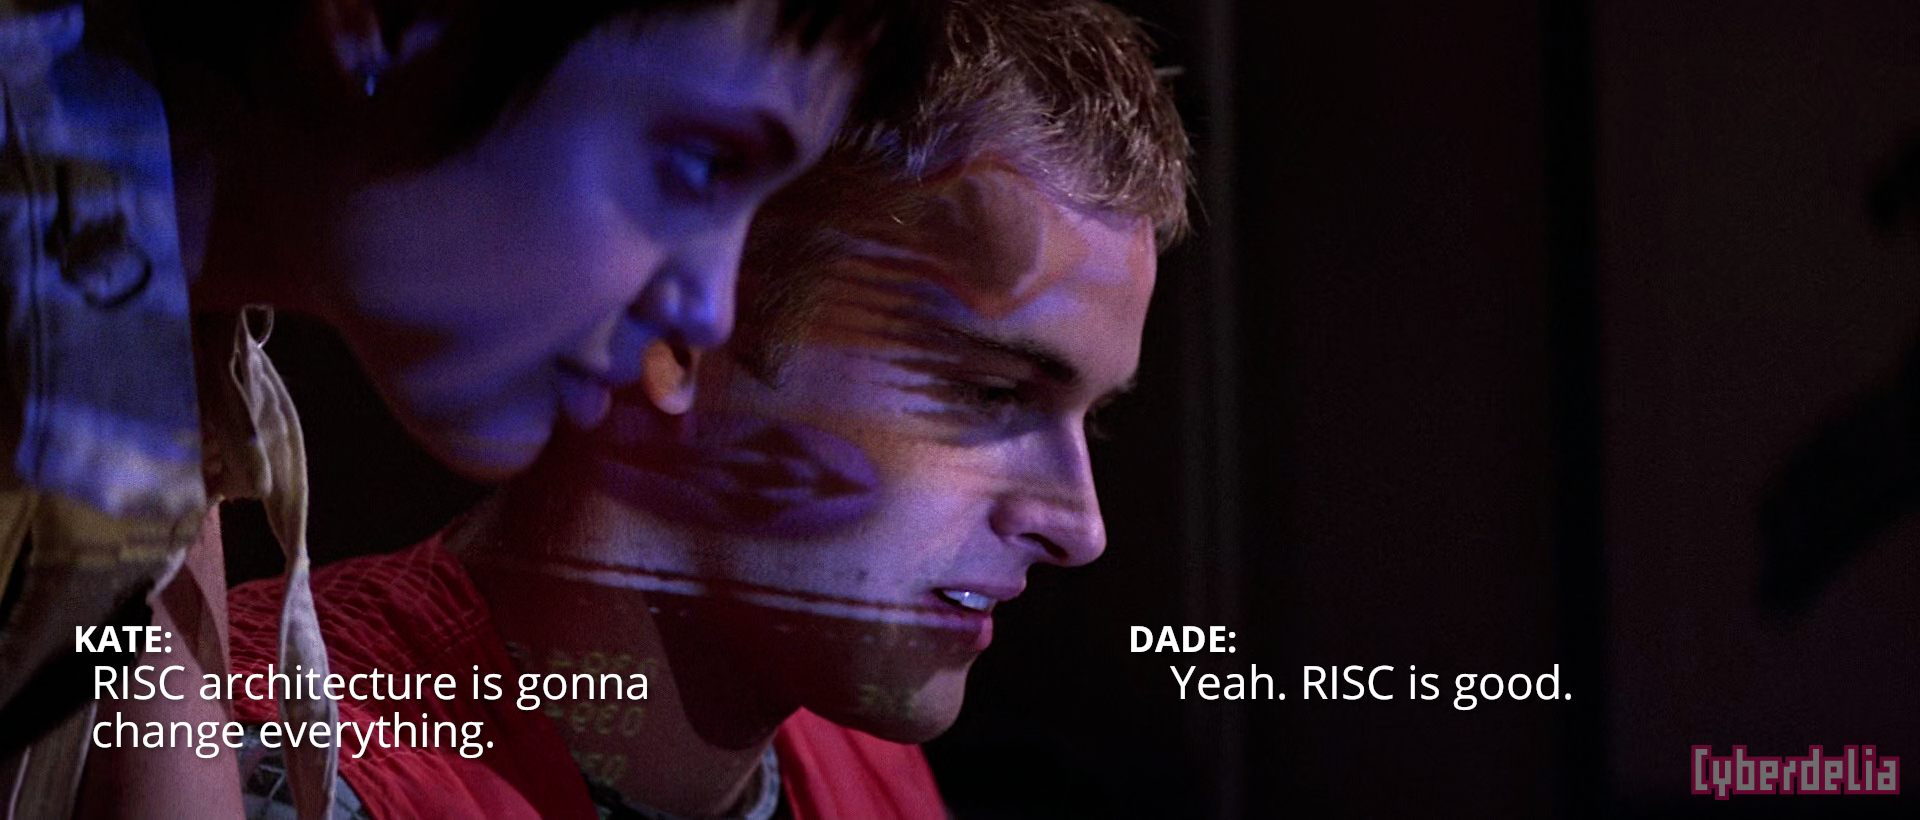 Kate: "RISC architecture is gonna change everything." Dade: "Yeah. RISC is good." Scene from Hackers (1995), characters Acid Burn and Dade Murphy played by Angelina Jolie and Jonny Lee Miller discussing technology while the glow of a laptop computer illuminates their faces.